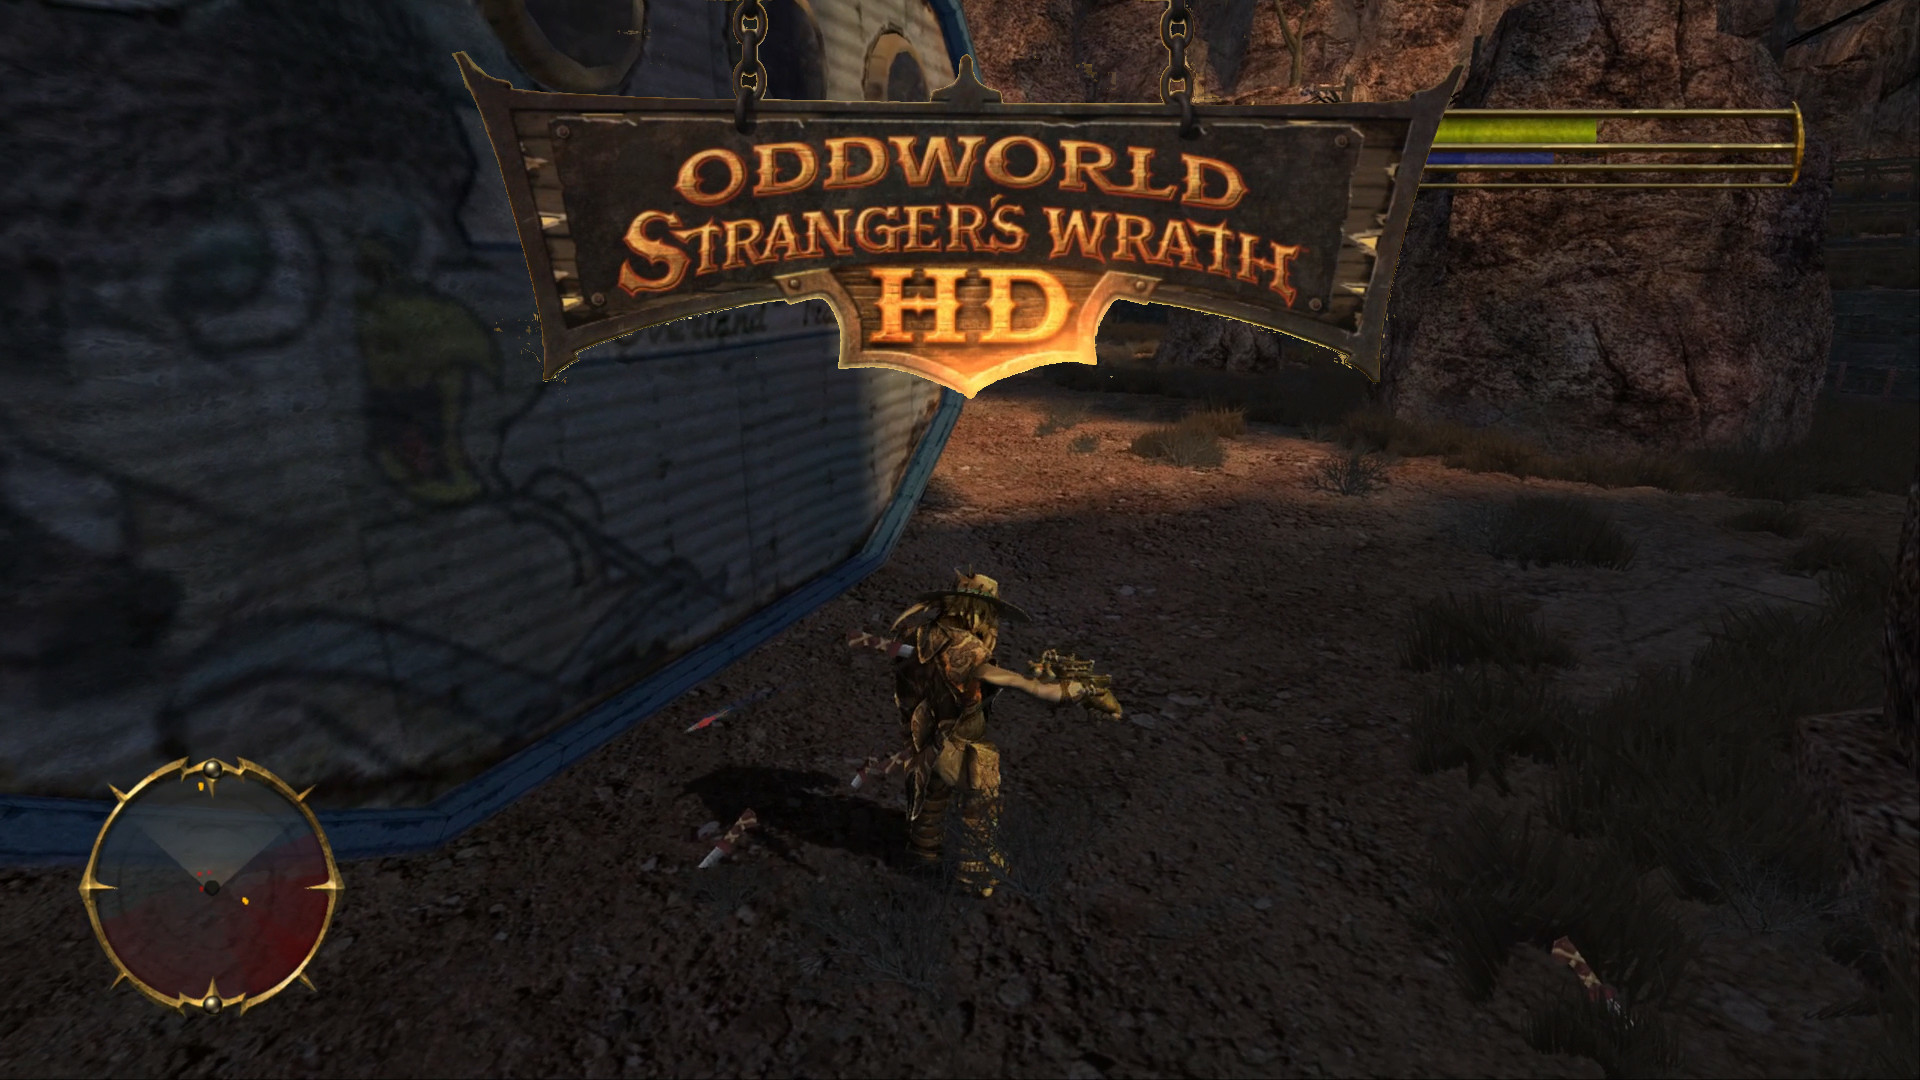 Filthy Hands Floyd – Let’s Play Oddworld: Stranger’s Wrath Part Two